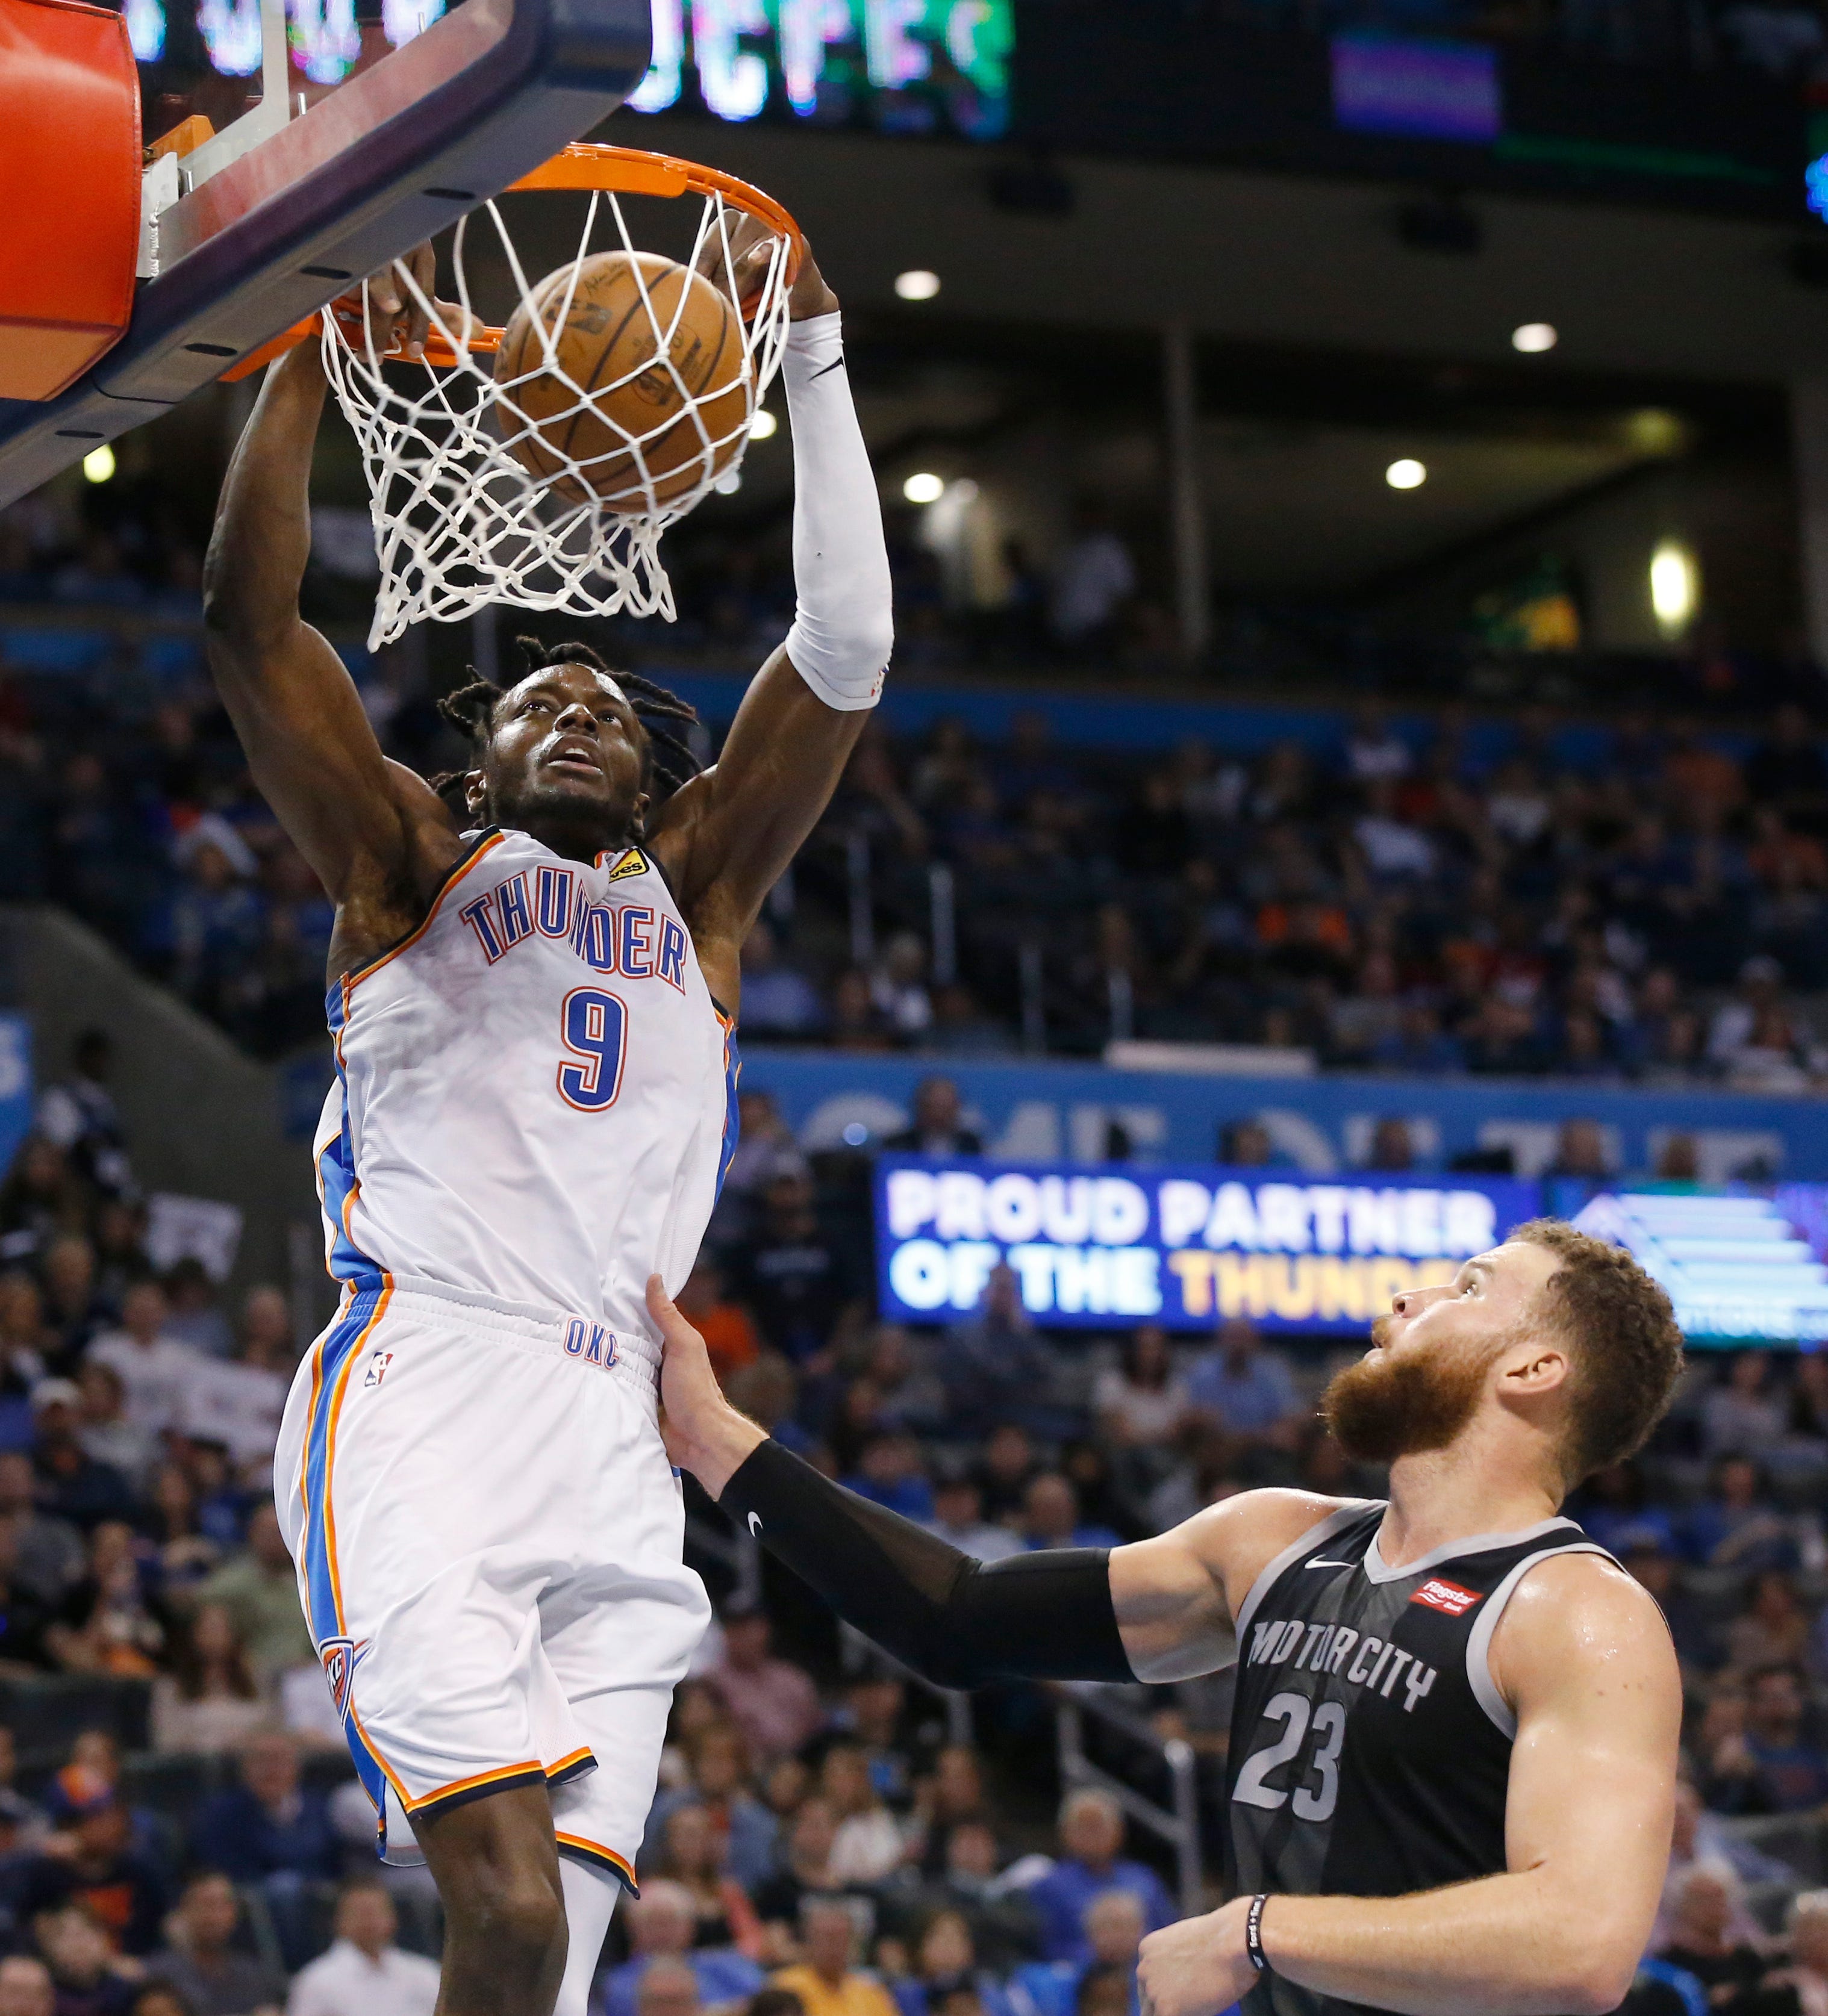 Oklahoma City Thunder forward Jerami Grant (9) dunks in front of Detroit Pistons forward Blake Griffin (23) during the second half of an NBA basketball game Friday, April 5, 2019, in Oklahoma City.  The Thunder defeated the Pistons 123-110.